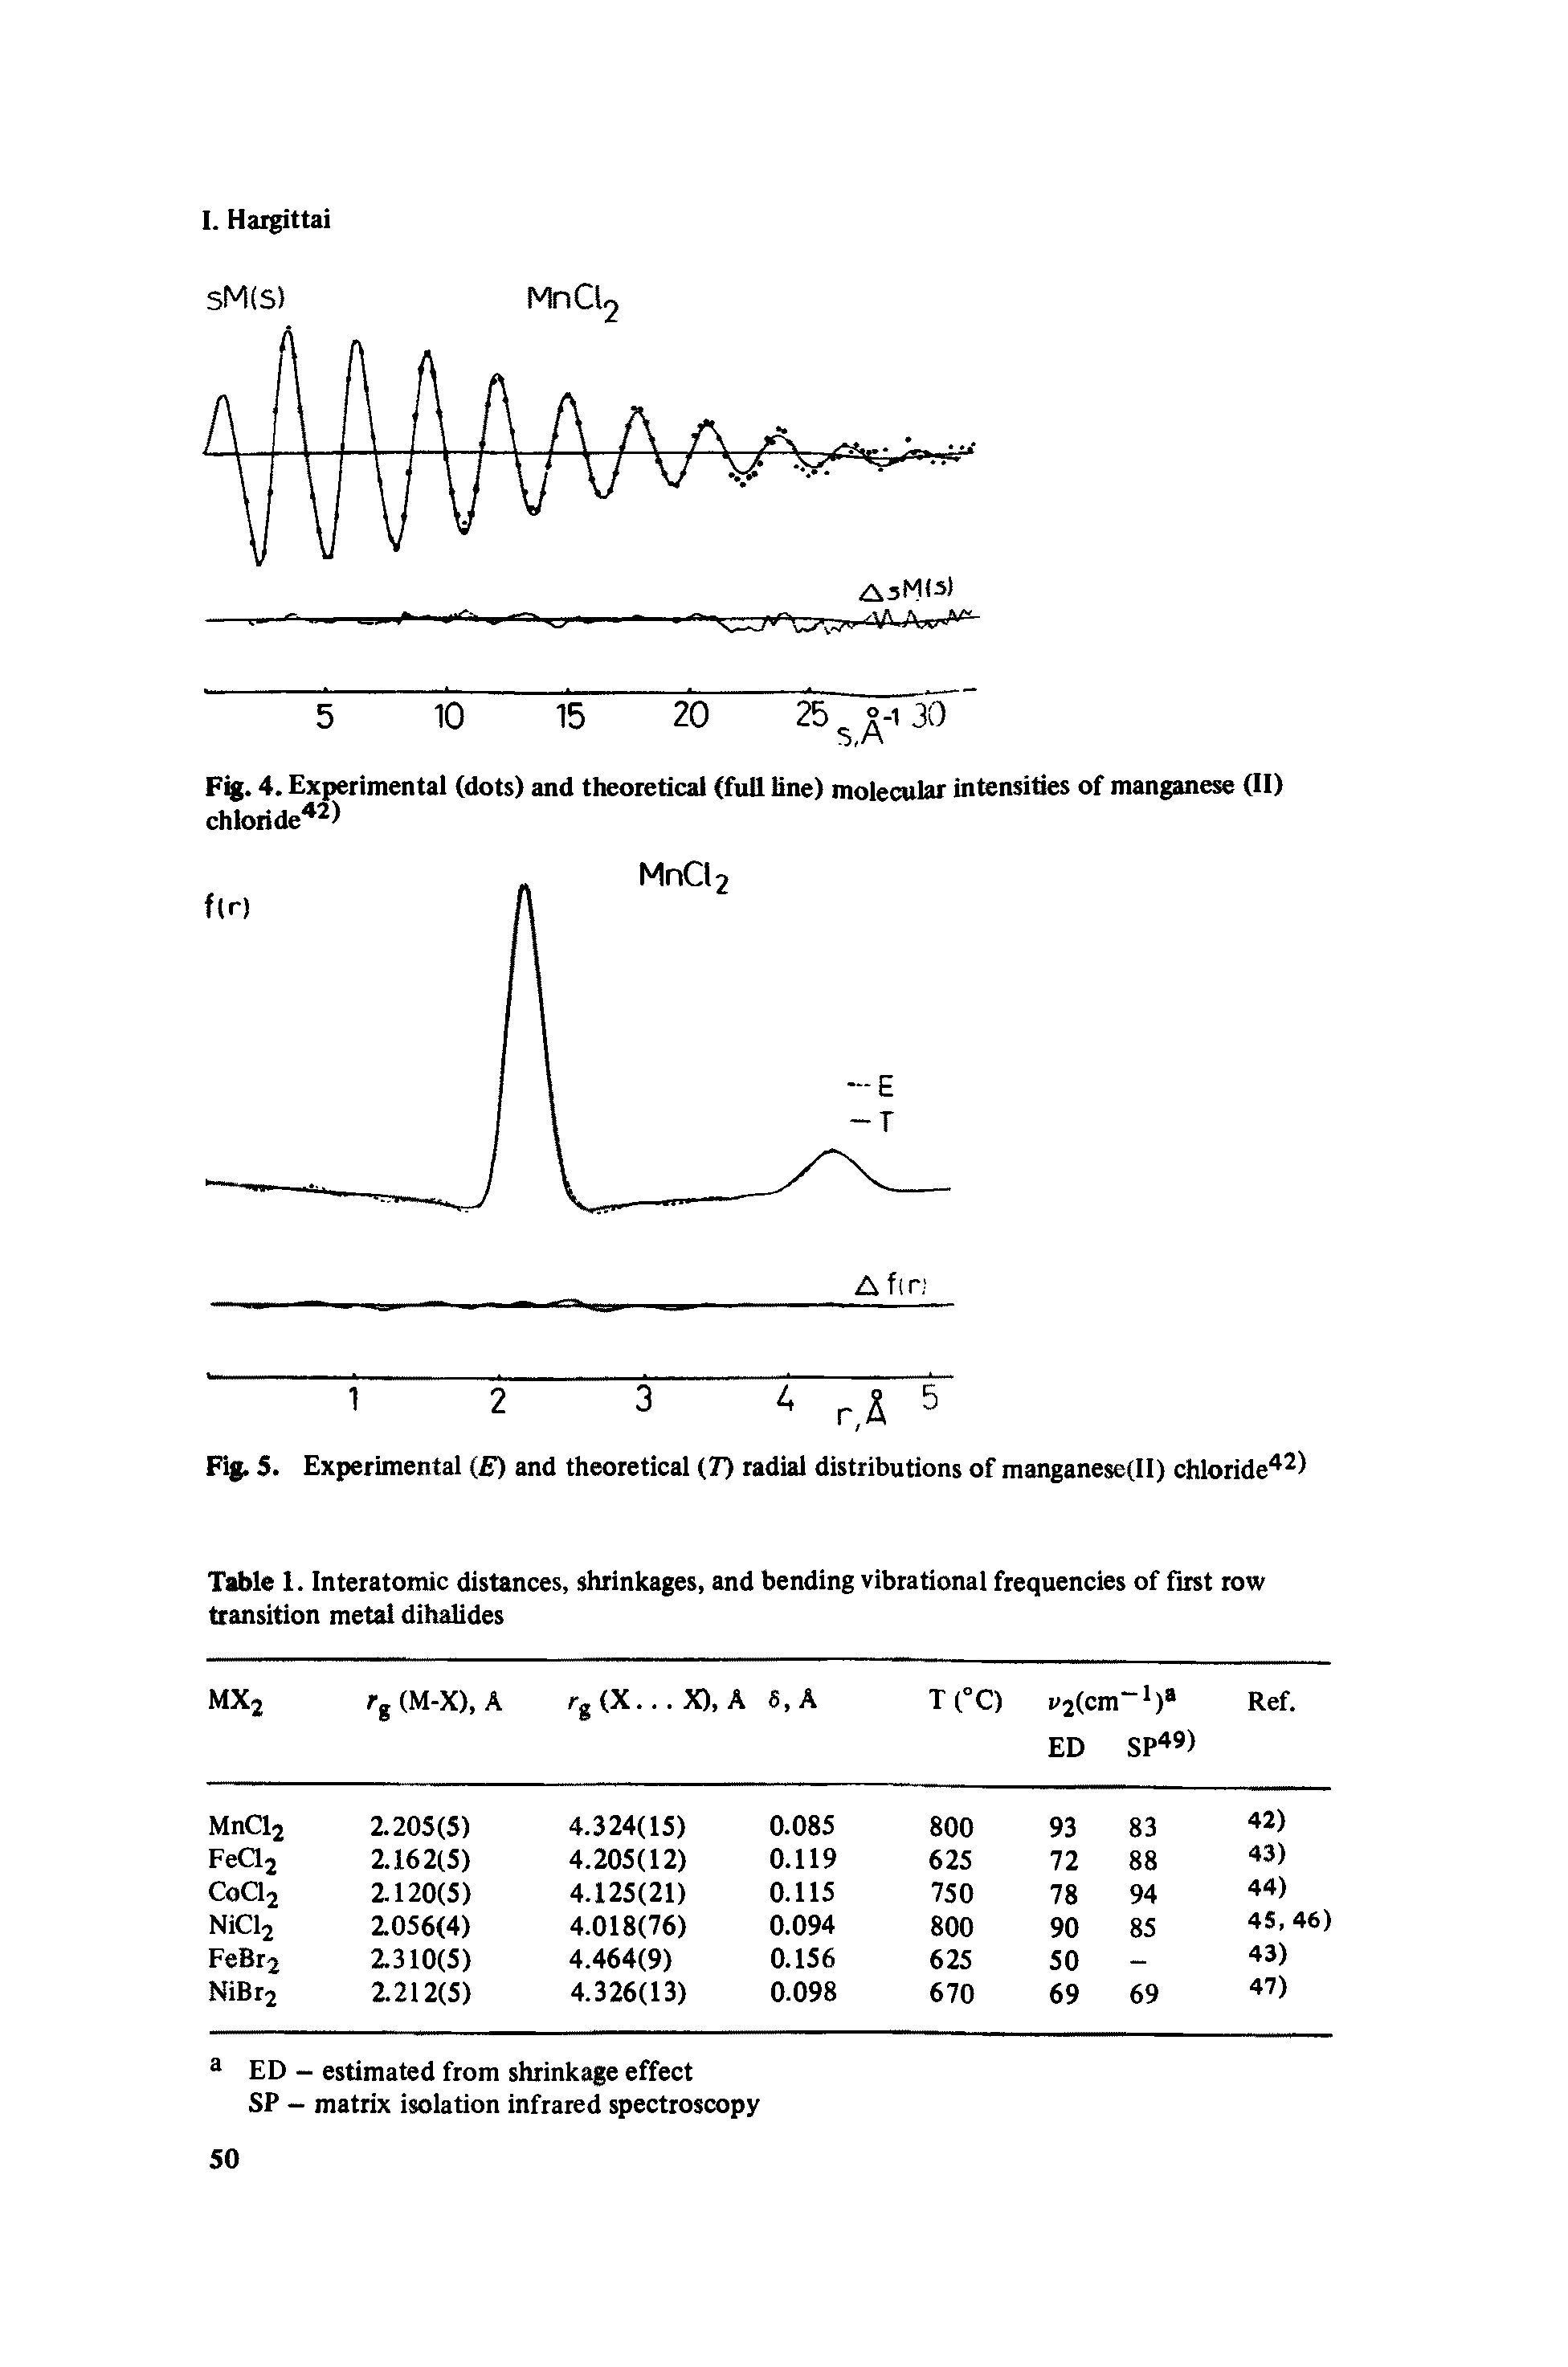 Table I. Interatomic distances, shrinkages, and bending vibrational frequencies of first row transition metal dihalides...